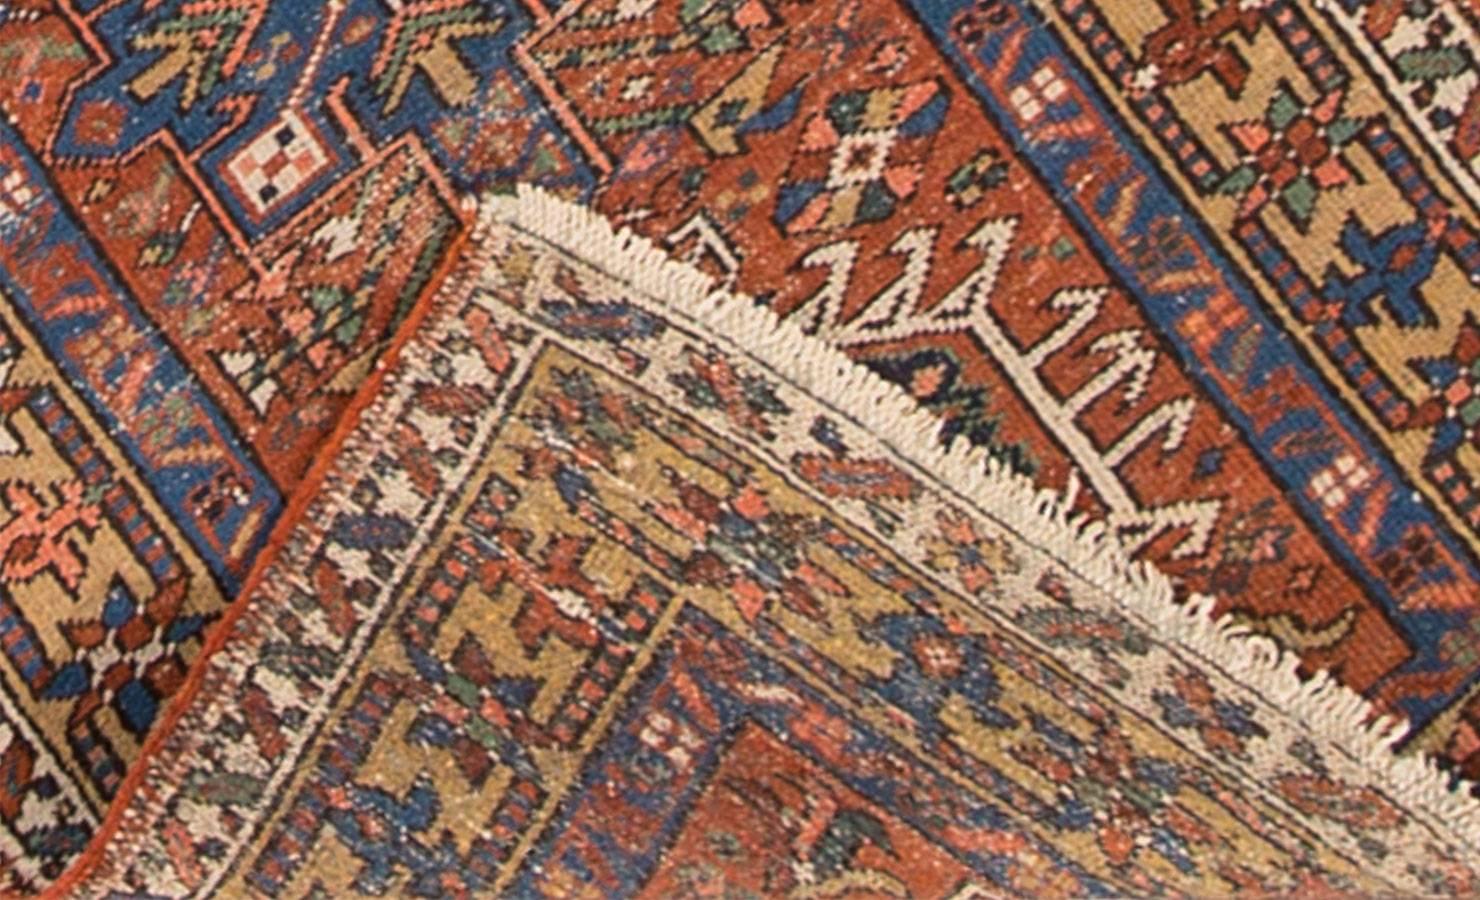 Vintage 1920s Persian Heriz runner carpet with a rust/burnt orange field and traditional all-over design in blue and green tones. Measures 2.10x10.04.